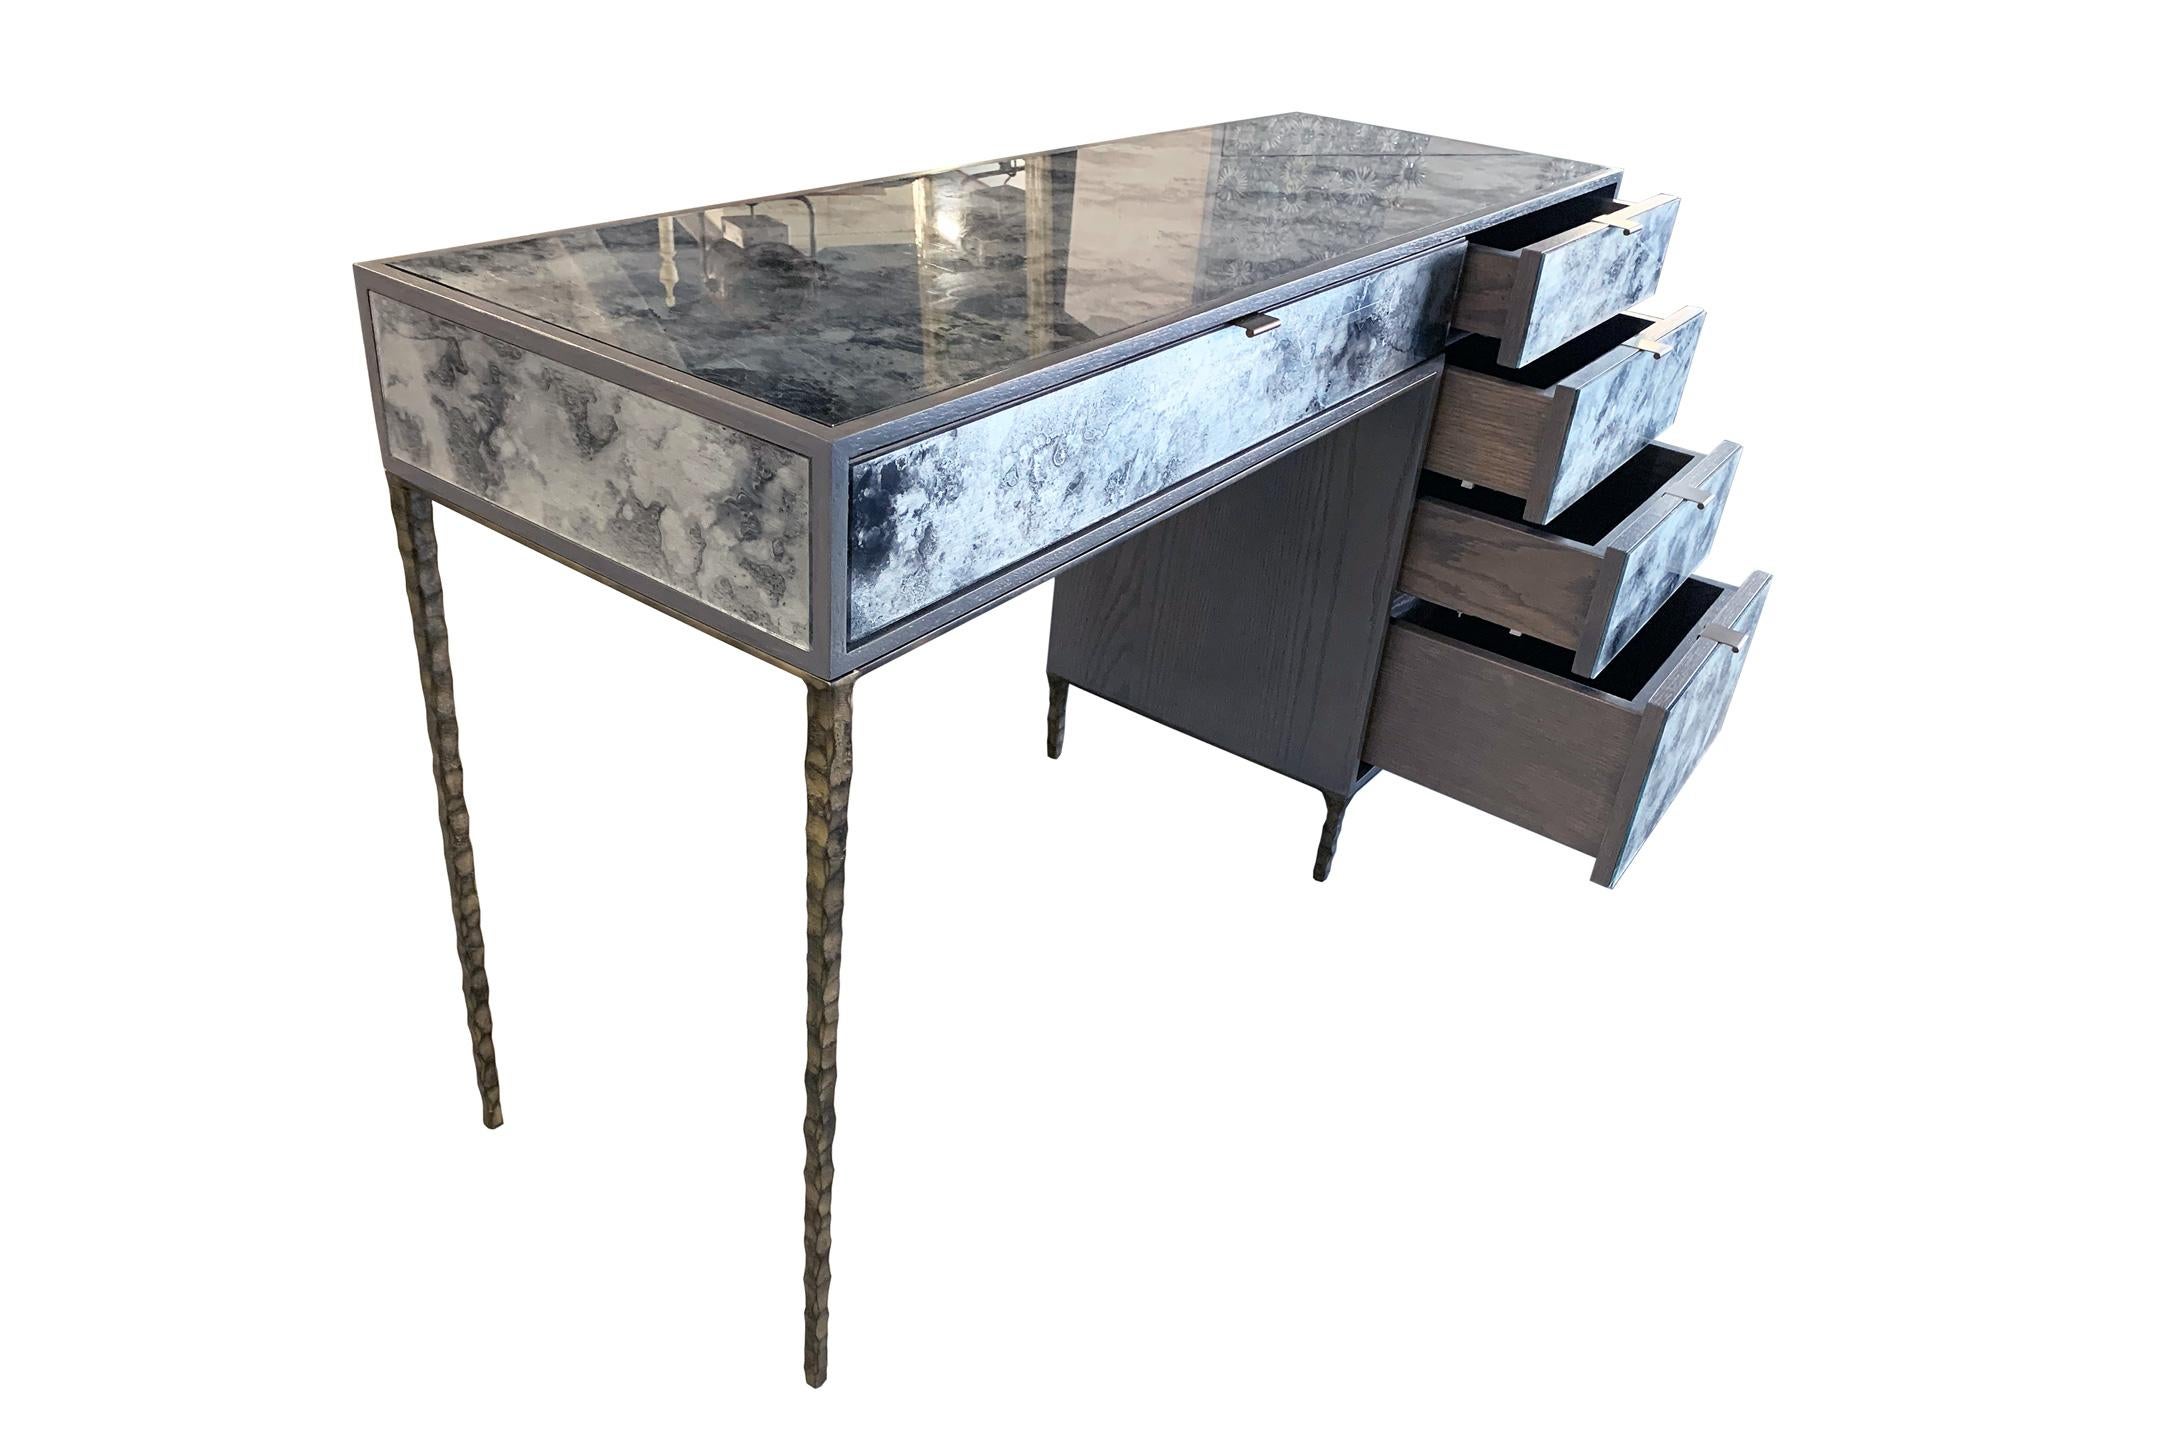 The mystic fume silver vanity by Ercole Home has a 5-drawer, with Earl gray wood finish on oak. Hand painted églomisé glass panels are inset on the surface.
There are five aluminum pulls and the hand-hammered metal base are in bronze